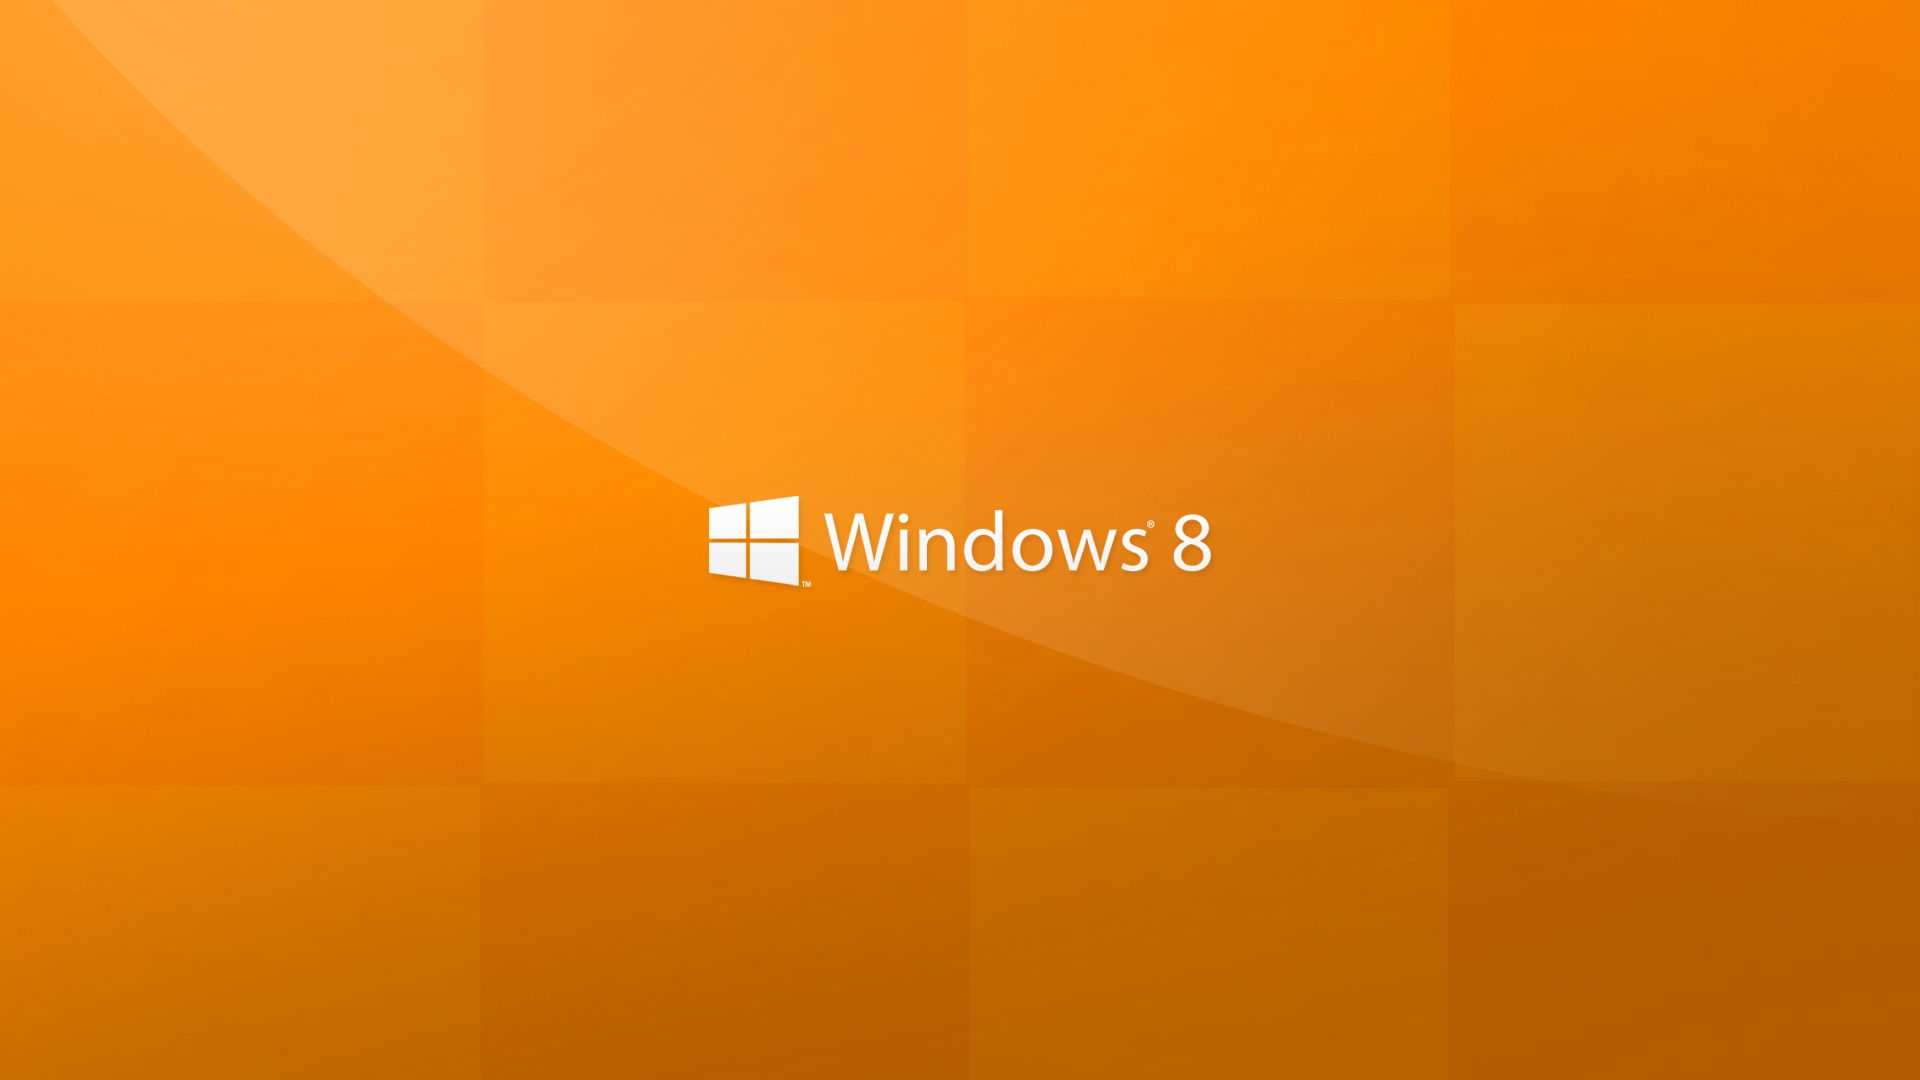 Windows 8 | Awesome Wallpapers